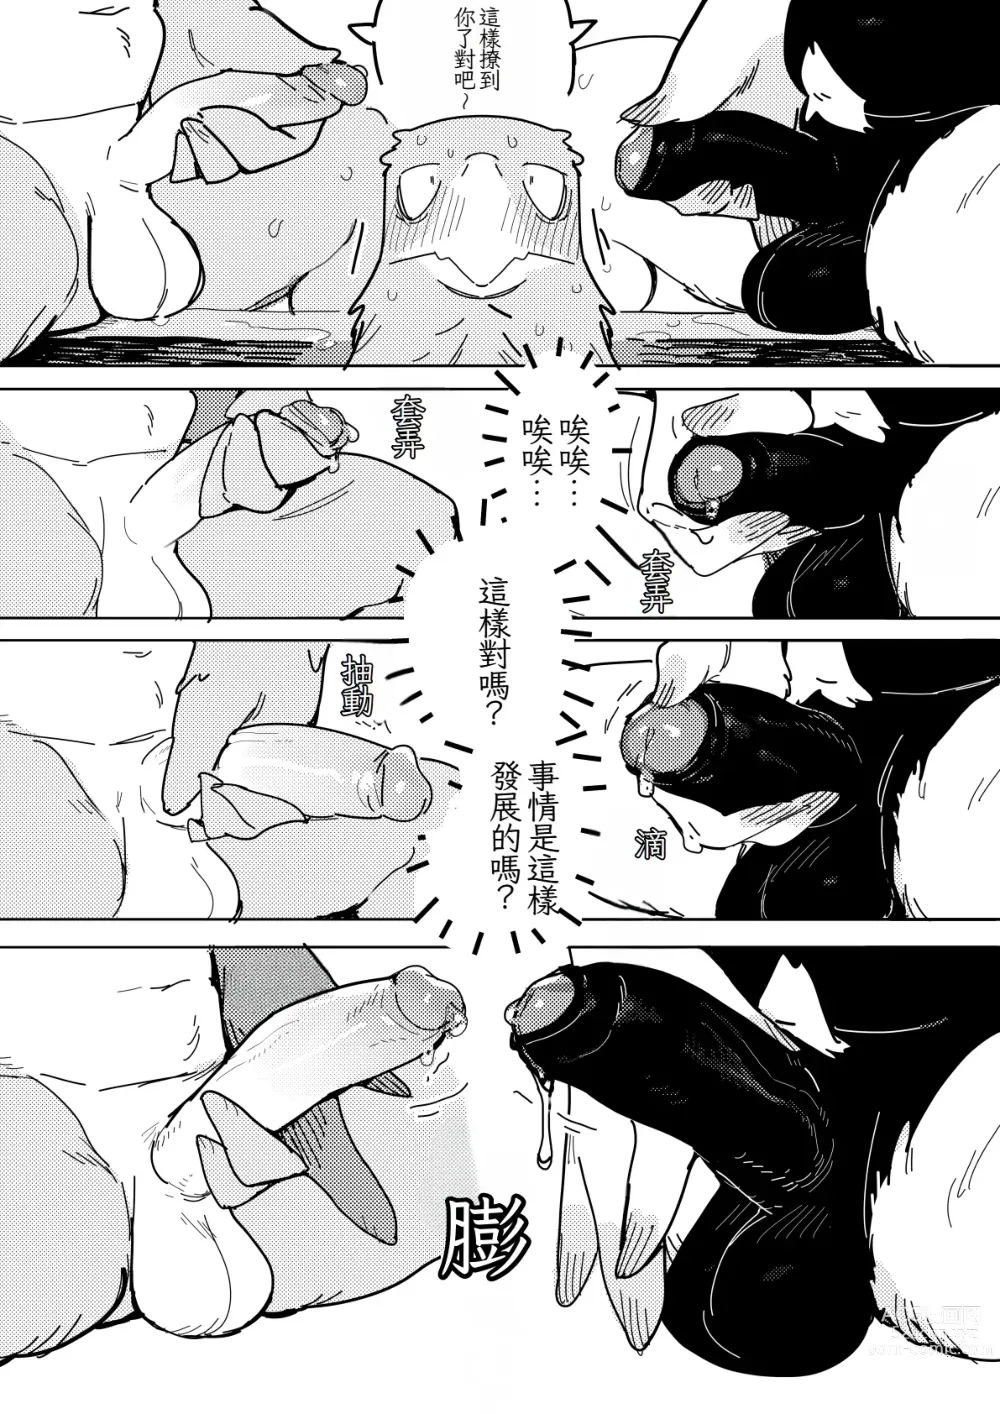 Page 9 of doujinshi White-Tailed Eagle and Owls 白尾鷹與鴞